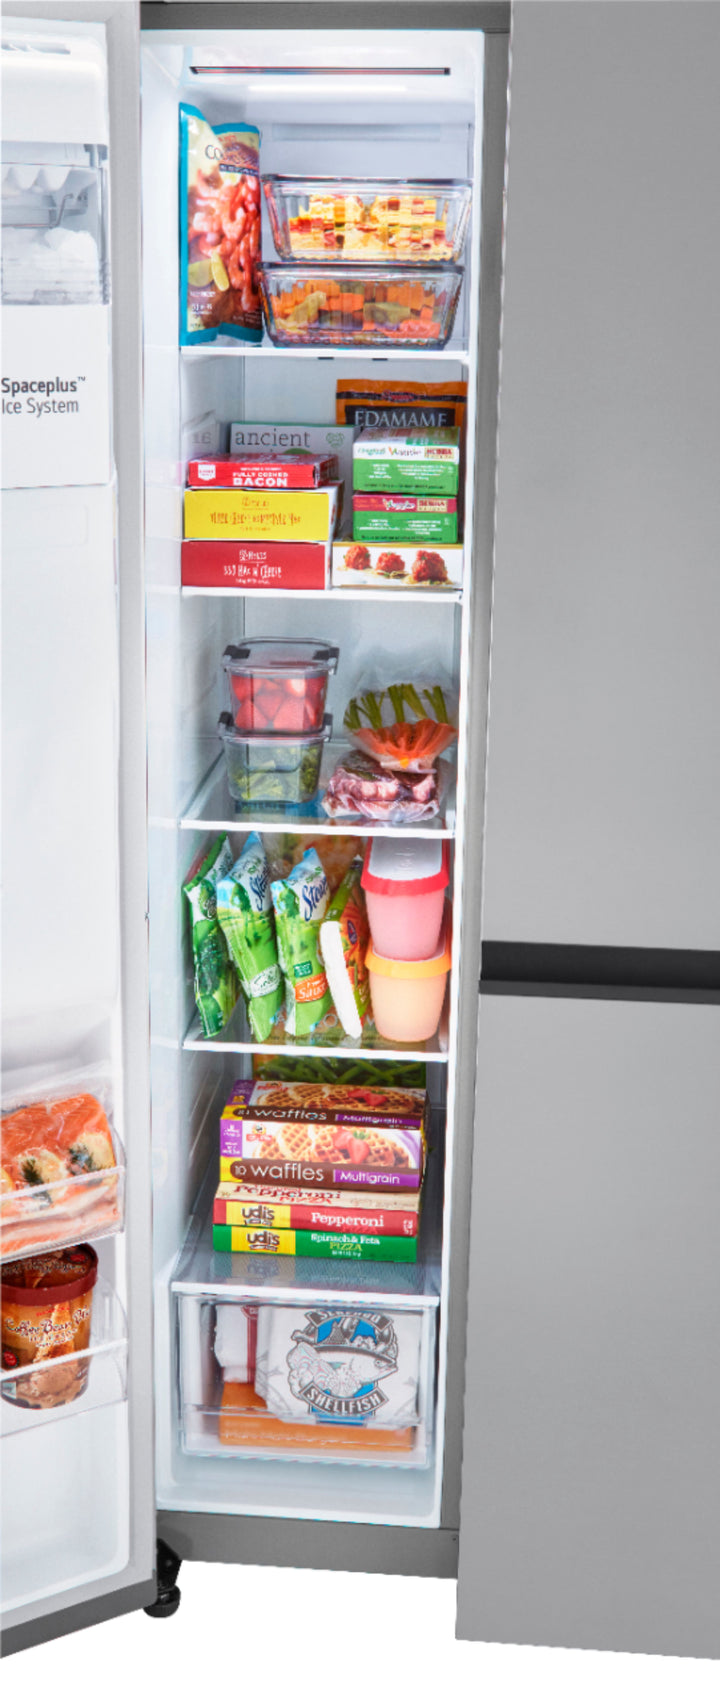 LG - 27.2 Cu. Ft. Side-by-Side Smart Refrigerator with SpacePlus Ice - Stainless steel_16